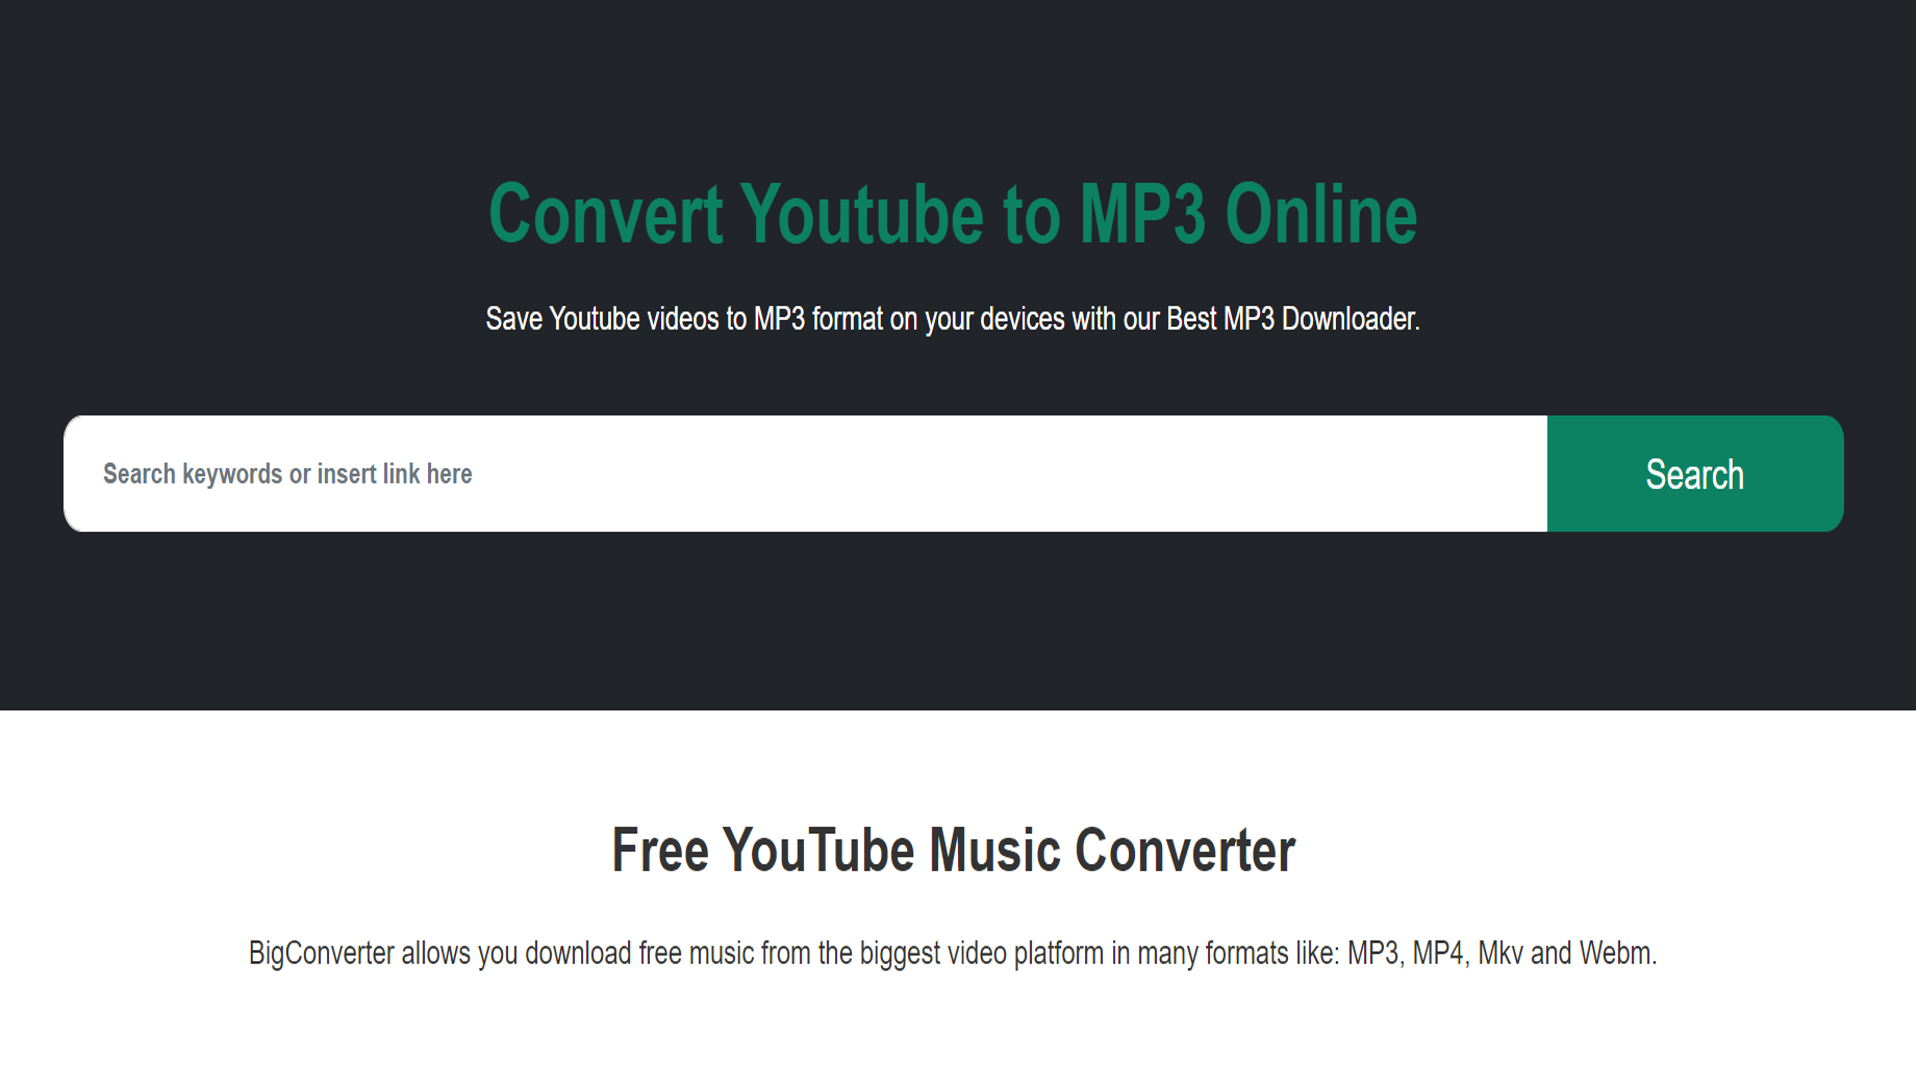 A resource for finding the best YouTube MP3 converter apps for your needs.